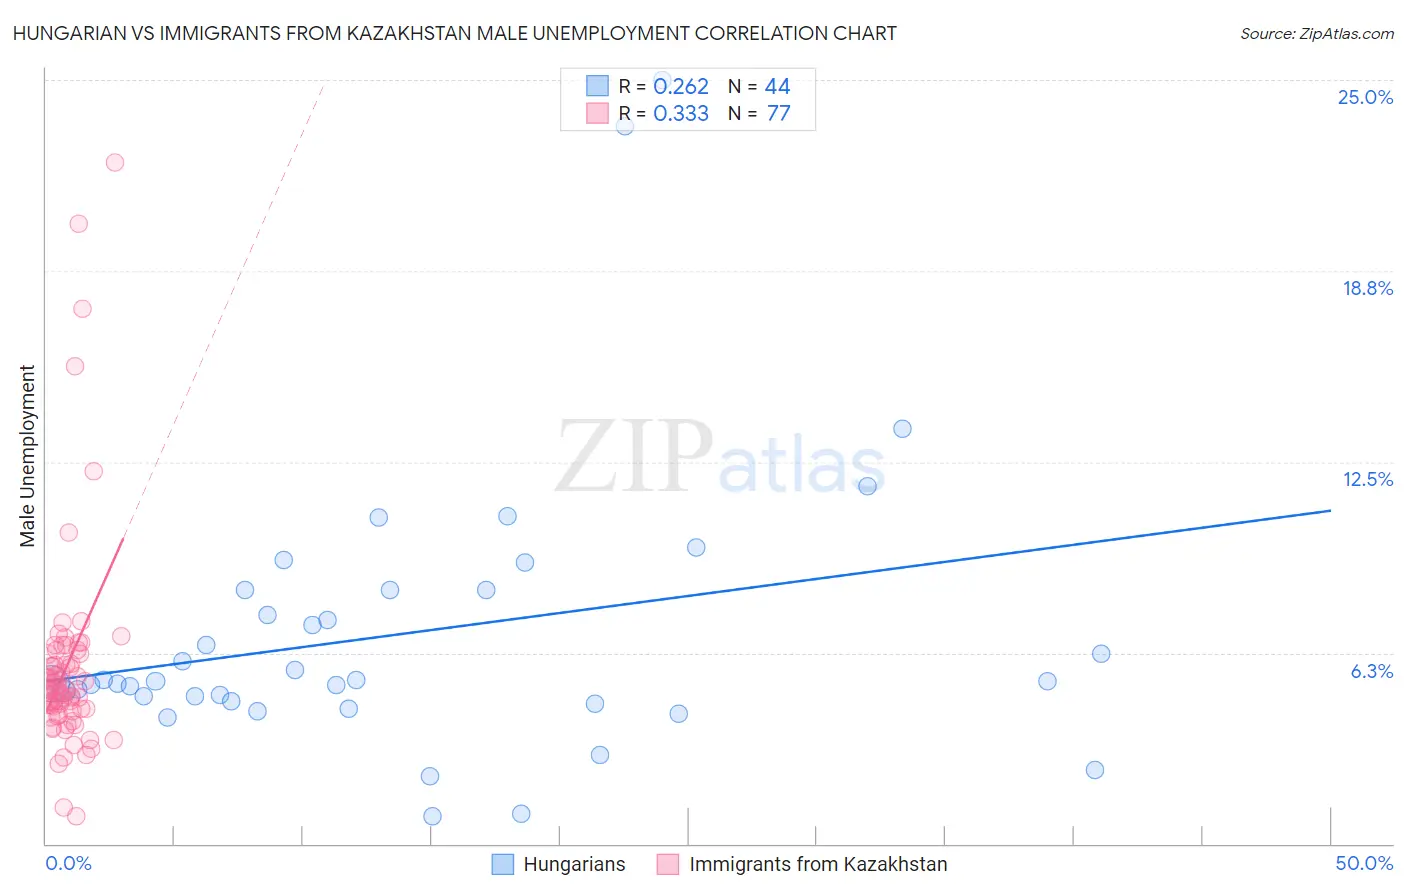 Hungarian vs Immigrants from Kazakhstan Male Unemployment